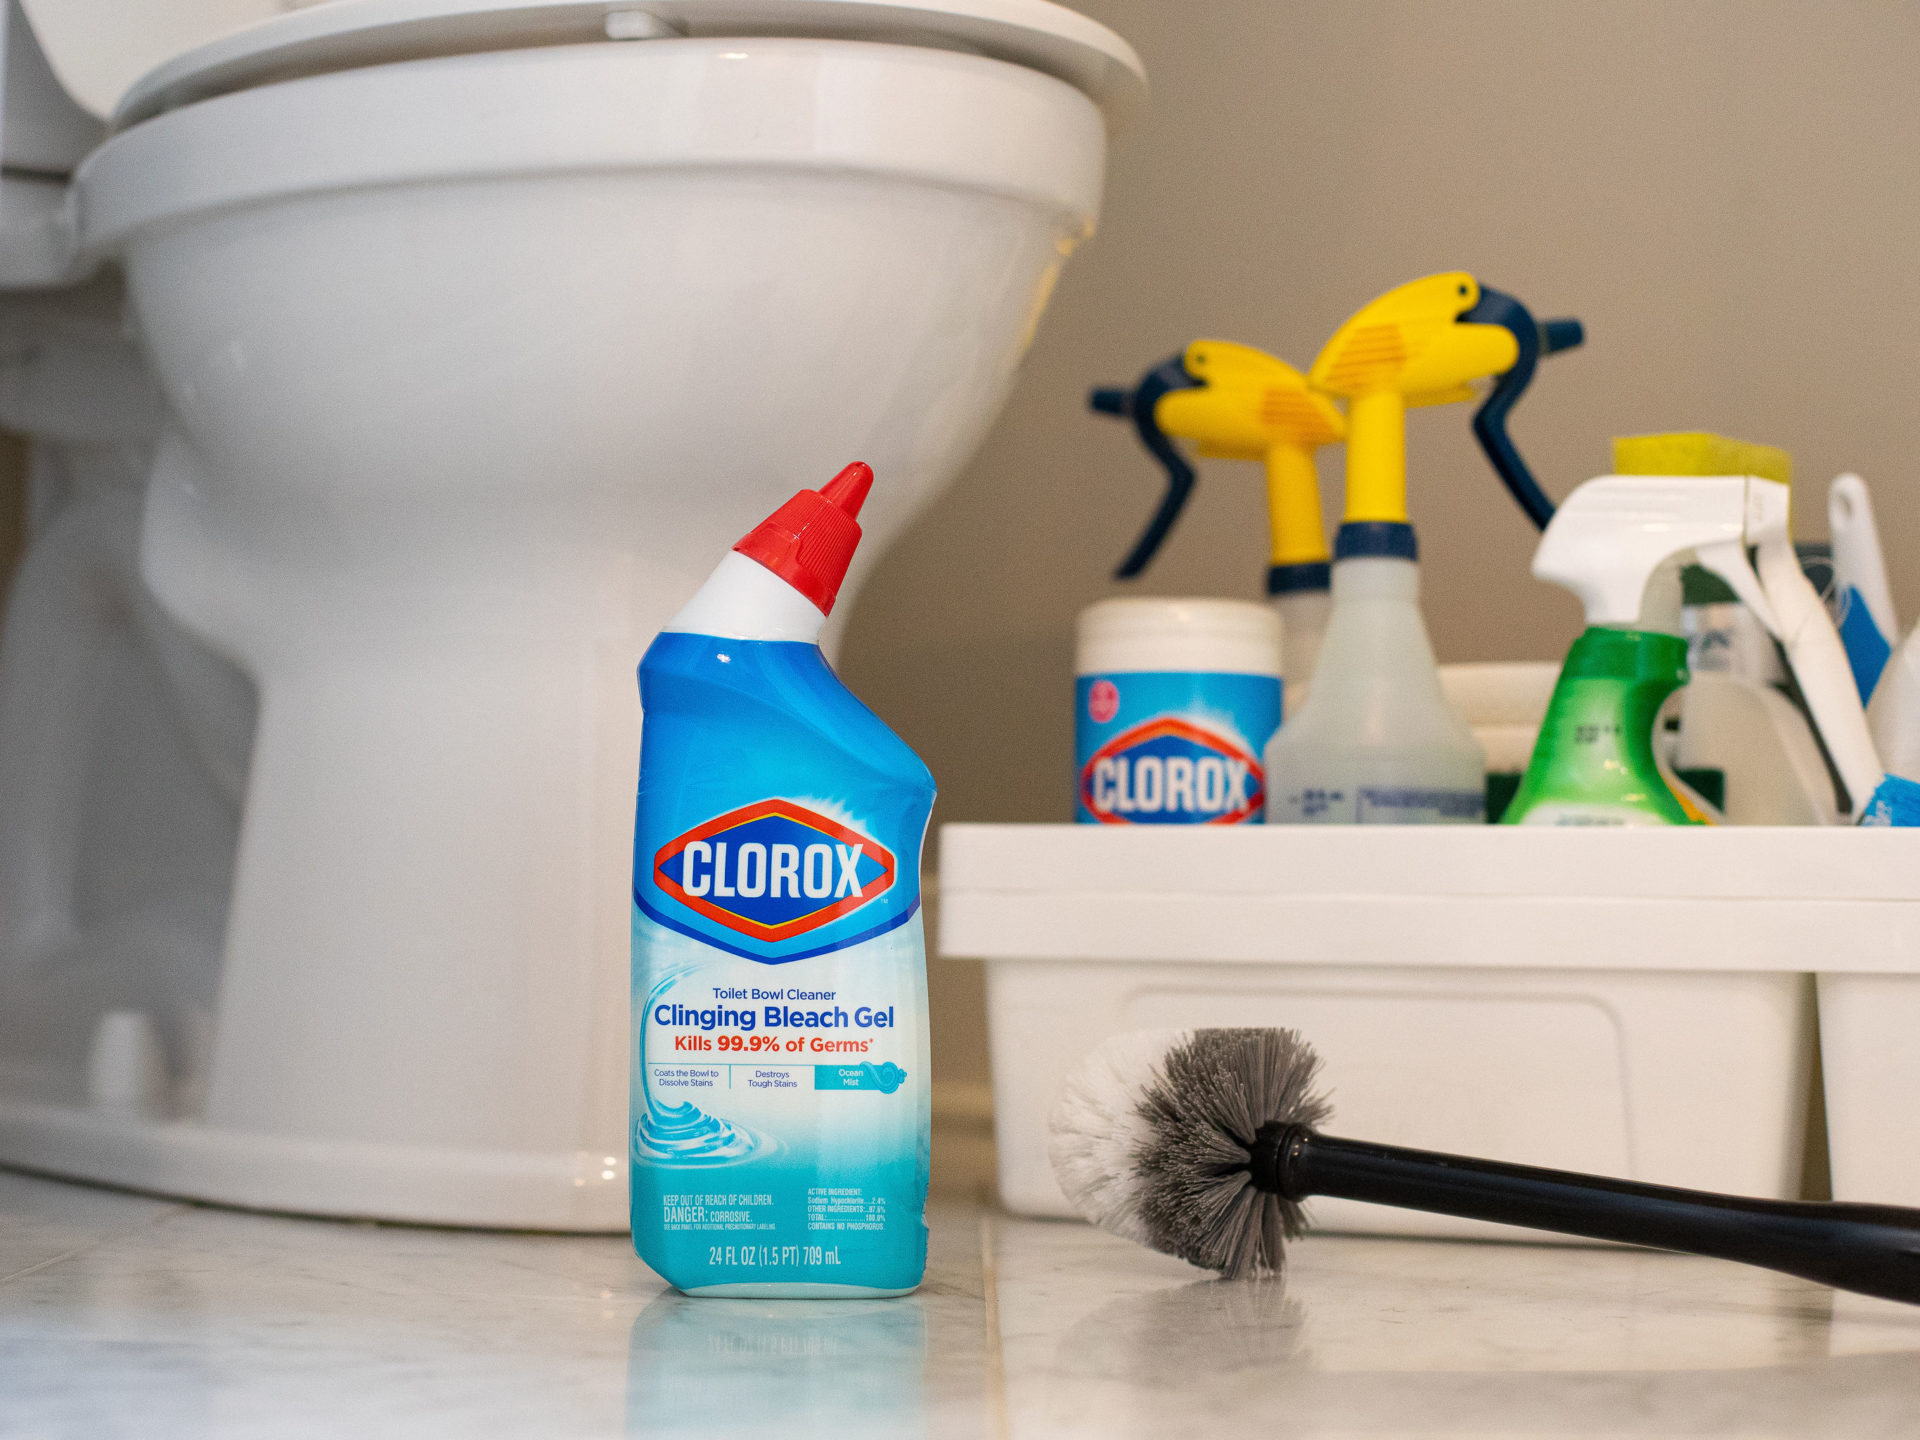 Get Clorox Toilet Bowl Cleaner For Just $1.99 At Kroger